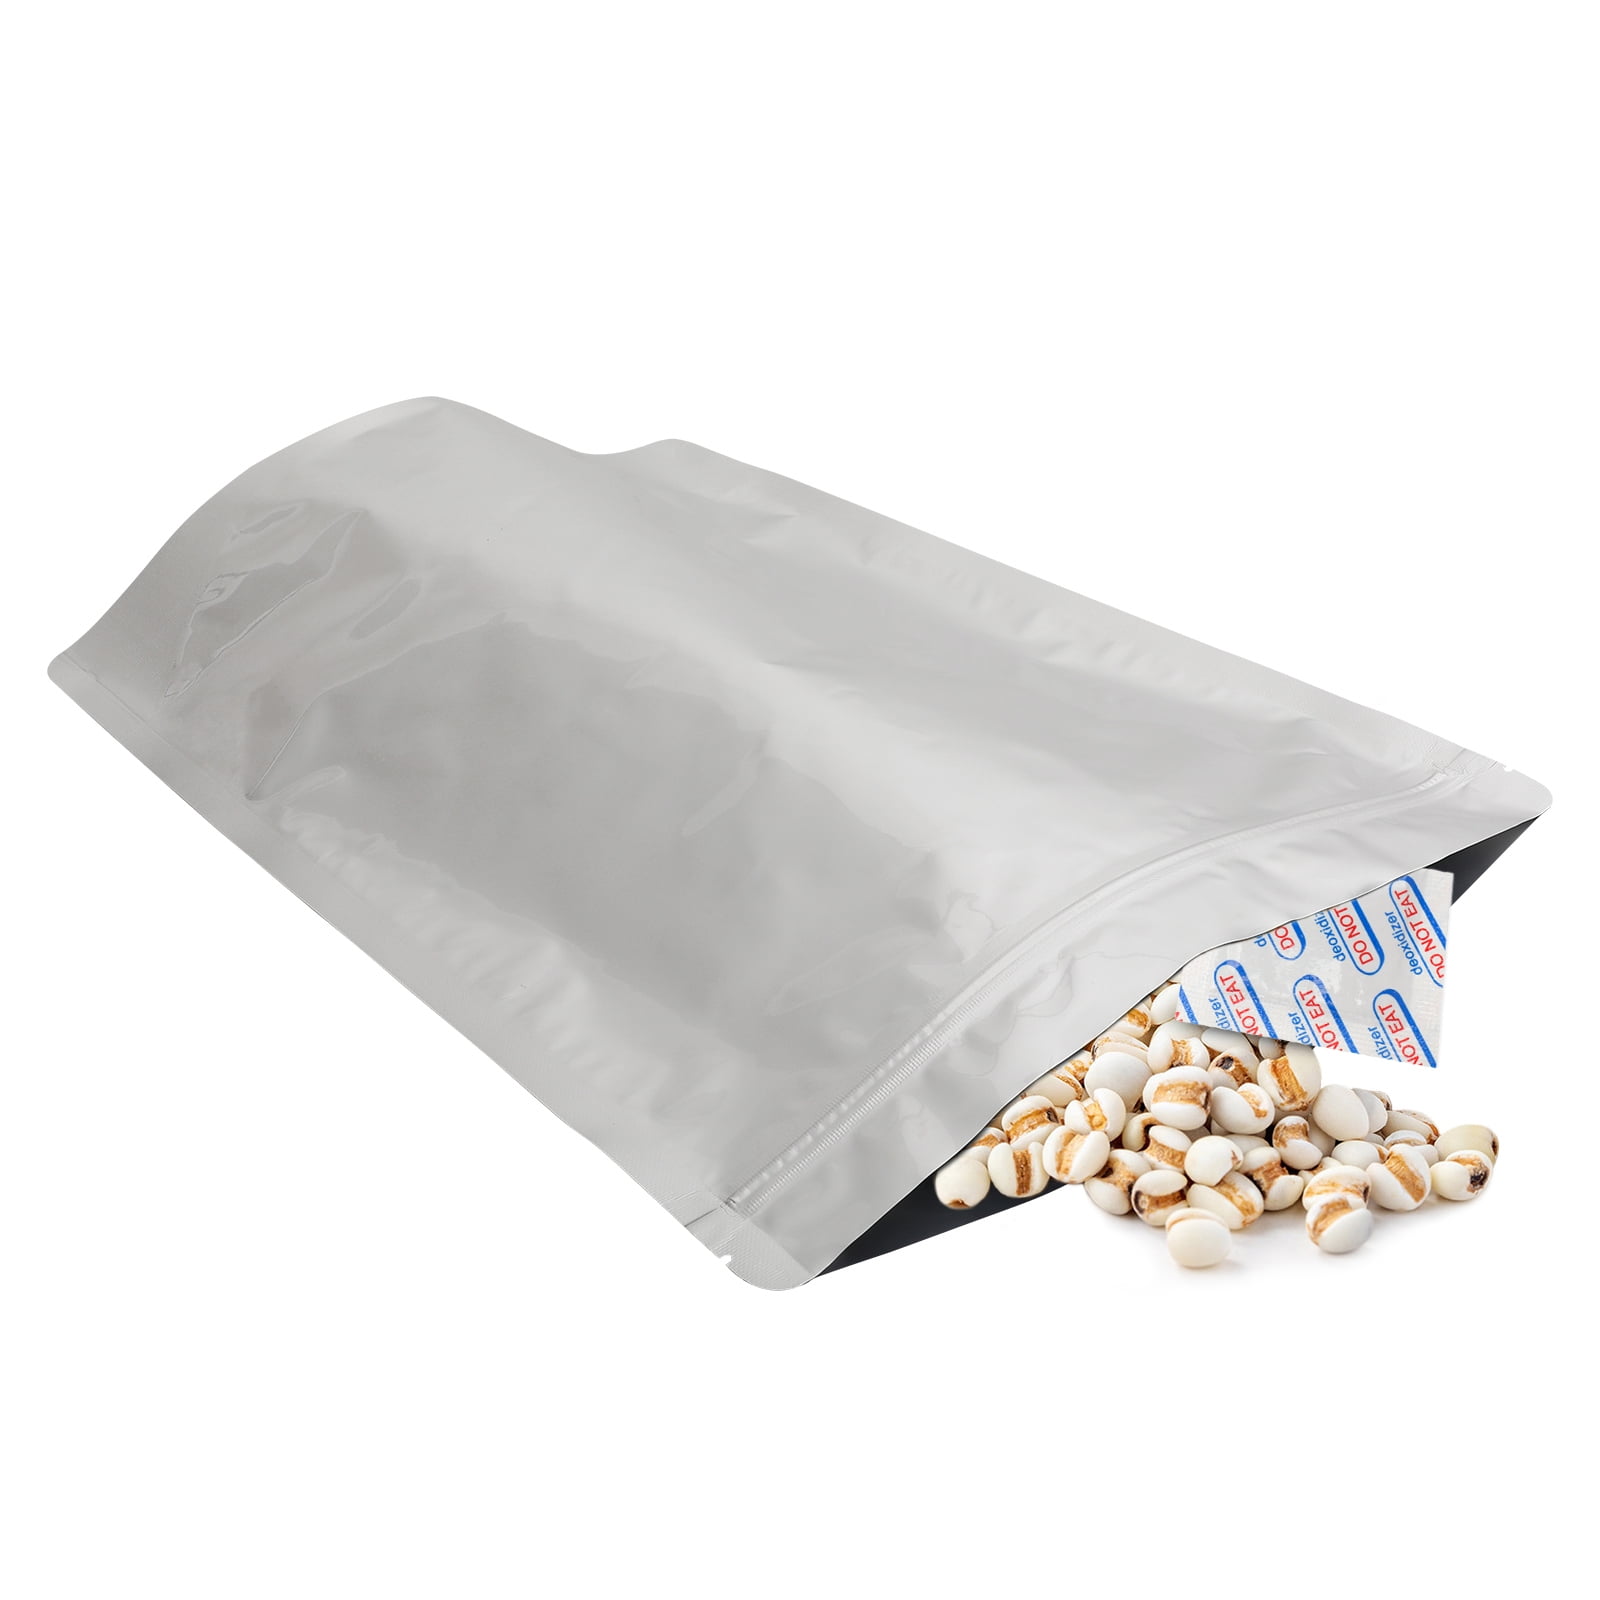 120 Mylar Bags for Food Storage with Oxygen Absorbers 300cc, 8 Mil 1Gallon  10x14, 7.5x11.5, 6x9, 4.3x6.3 Stand-Up Zipper Resealable Bags 